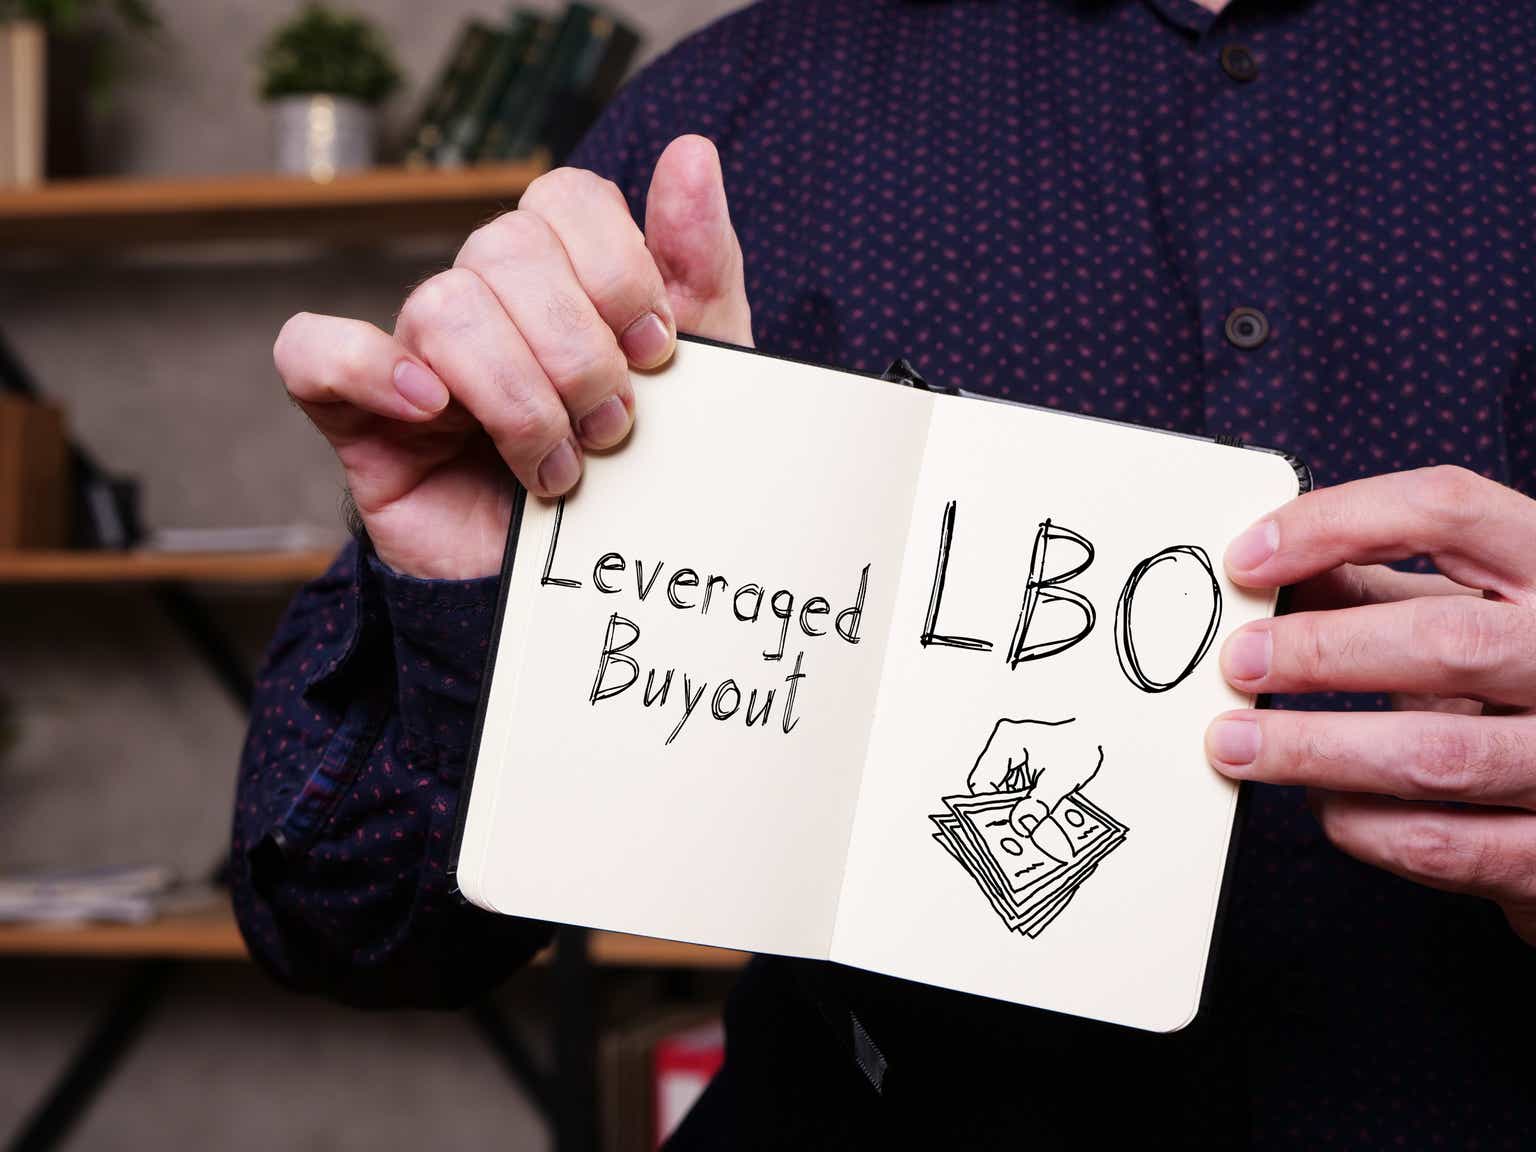 Leveraged Buyout LBO is shown on the business photo using the text